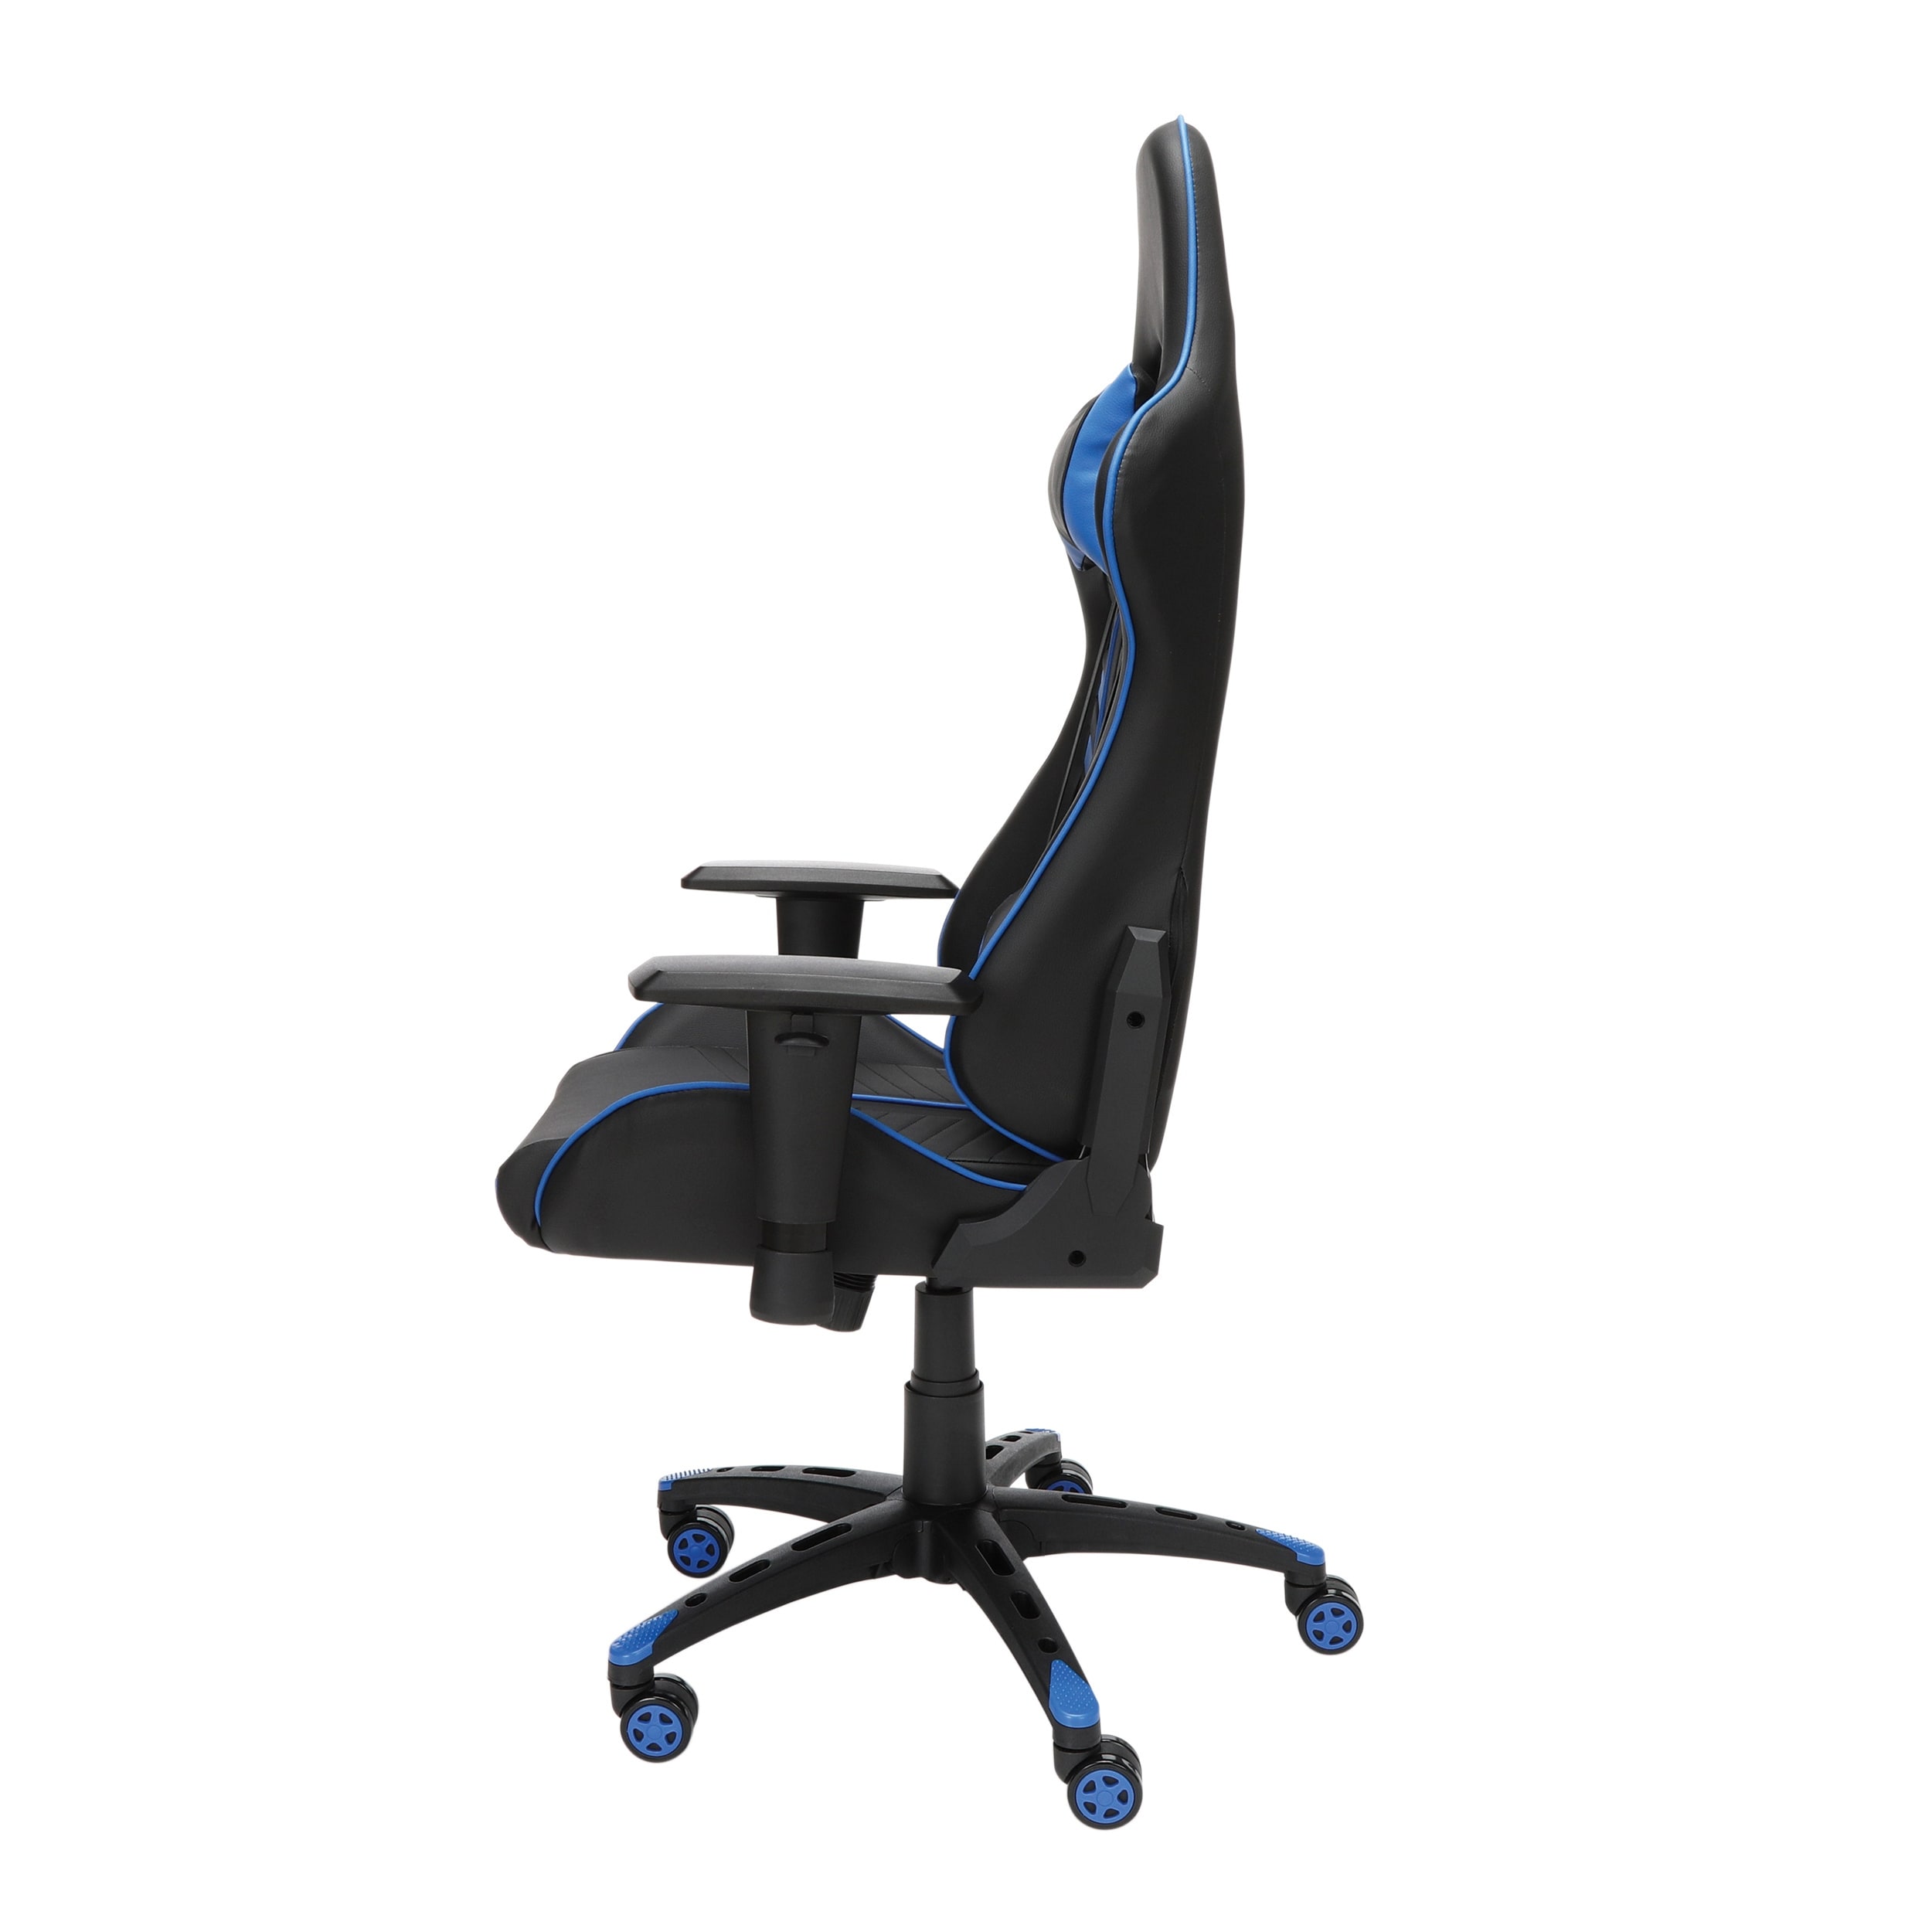 https://ak1.ostkcdn.com/images/products/is/images/direct/1192fb32ec7e471dad03fa0cfdd633e4167dcb61/OFM-Essentials-Collection-Racing-Style-Gaming-Chair.jpg